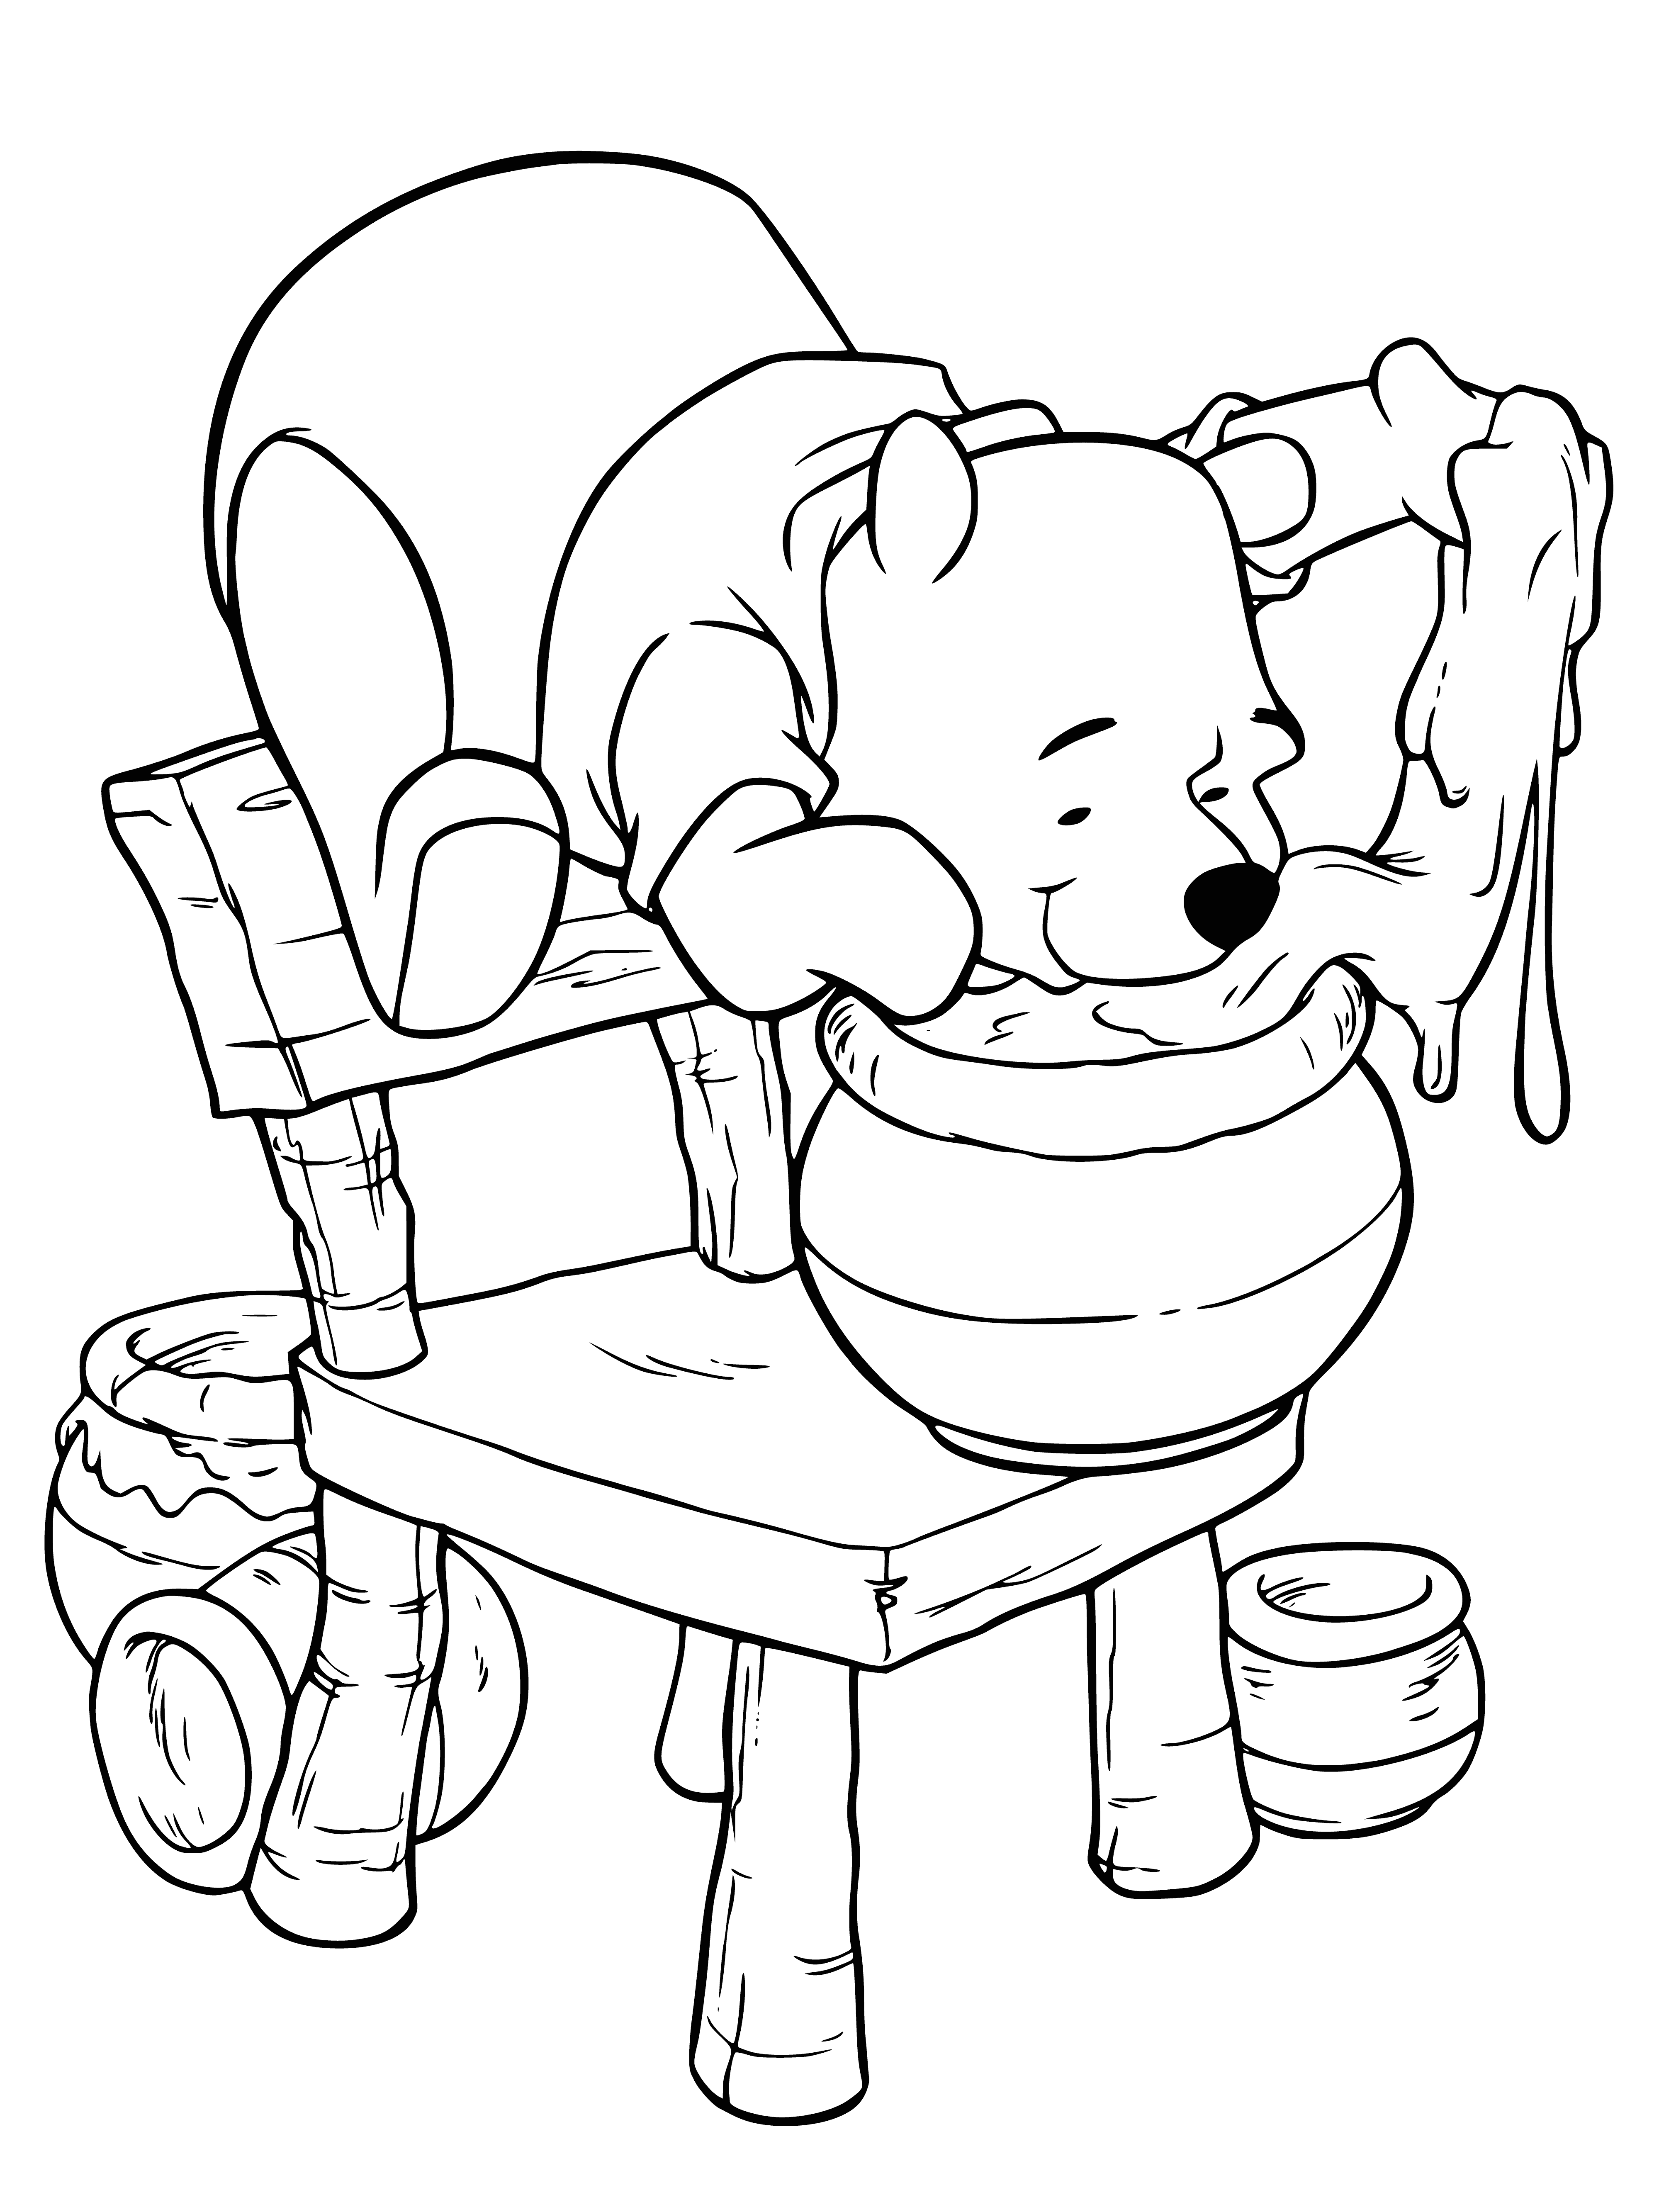 coloring page: Winnie the Pooh grins happily, standing in front of a tree with a pot of honey in hand. #honeylovers